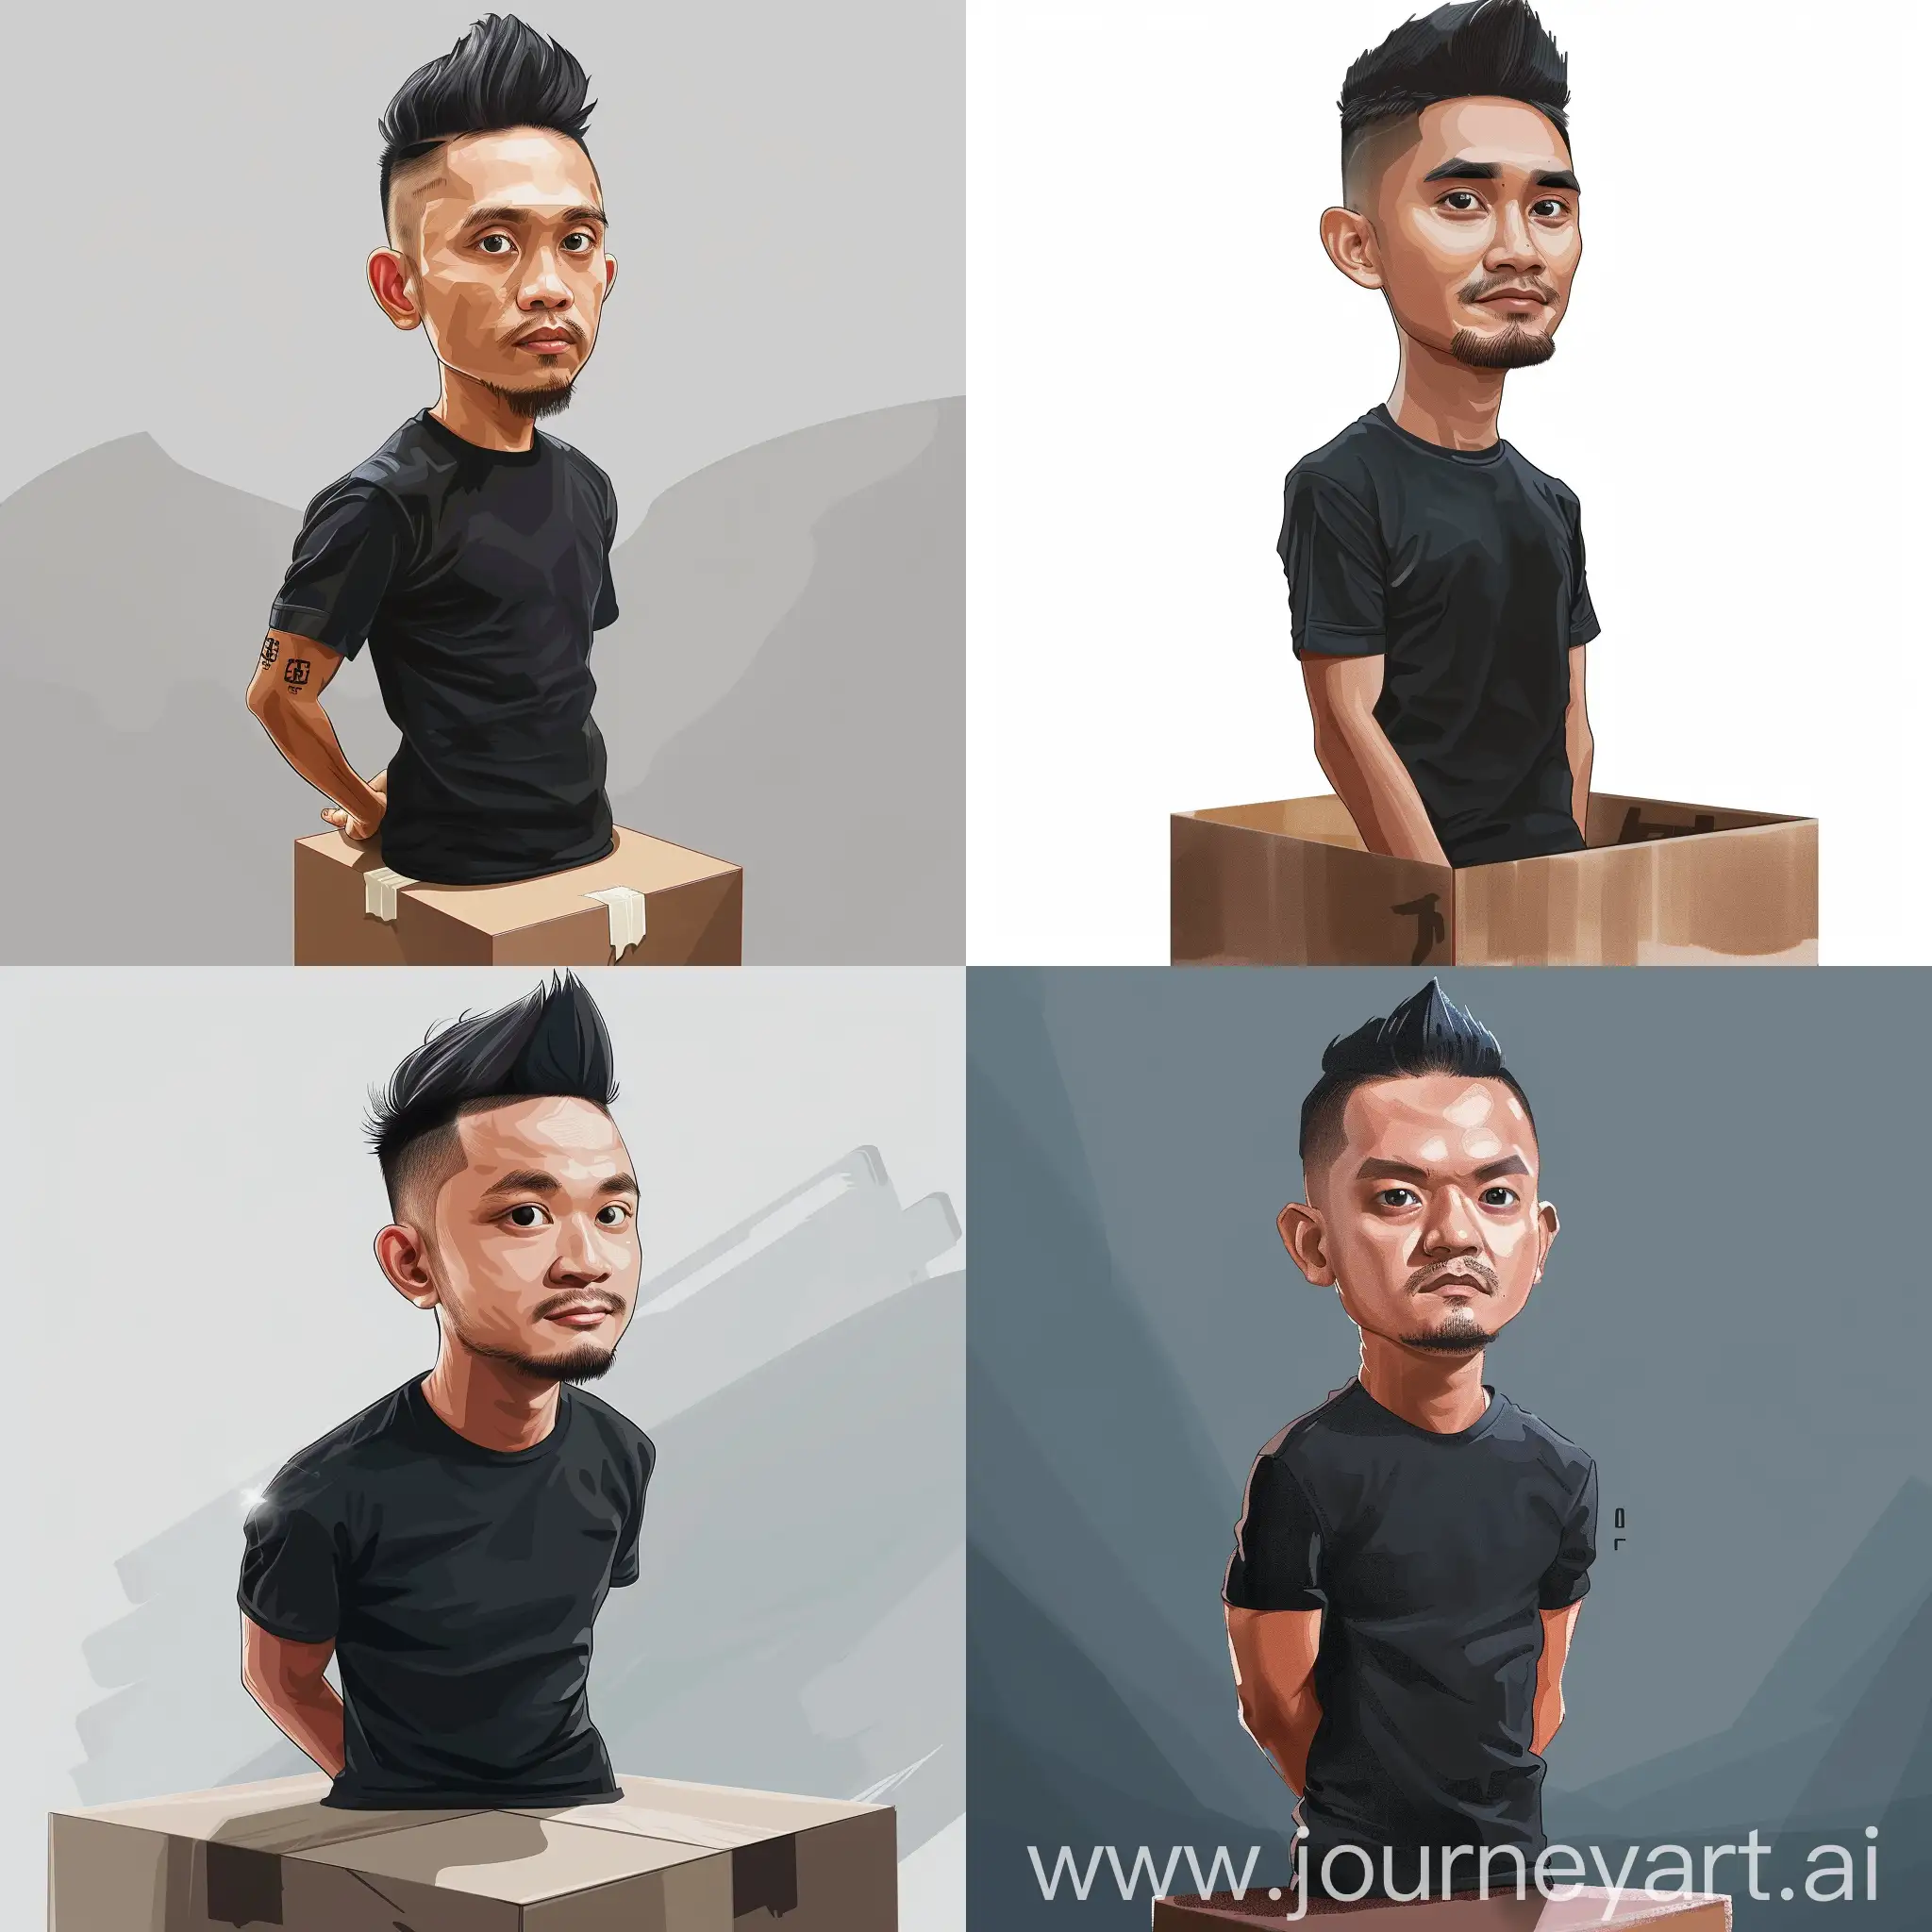 Indonesian-Guy-with-Buzz-Cut-Hair-Standing-on-Box